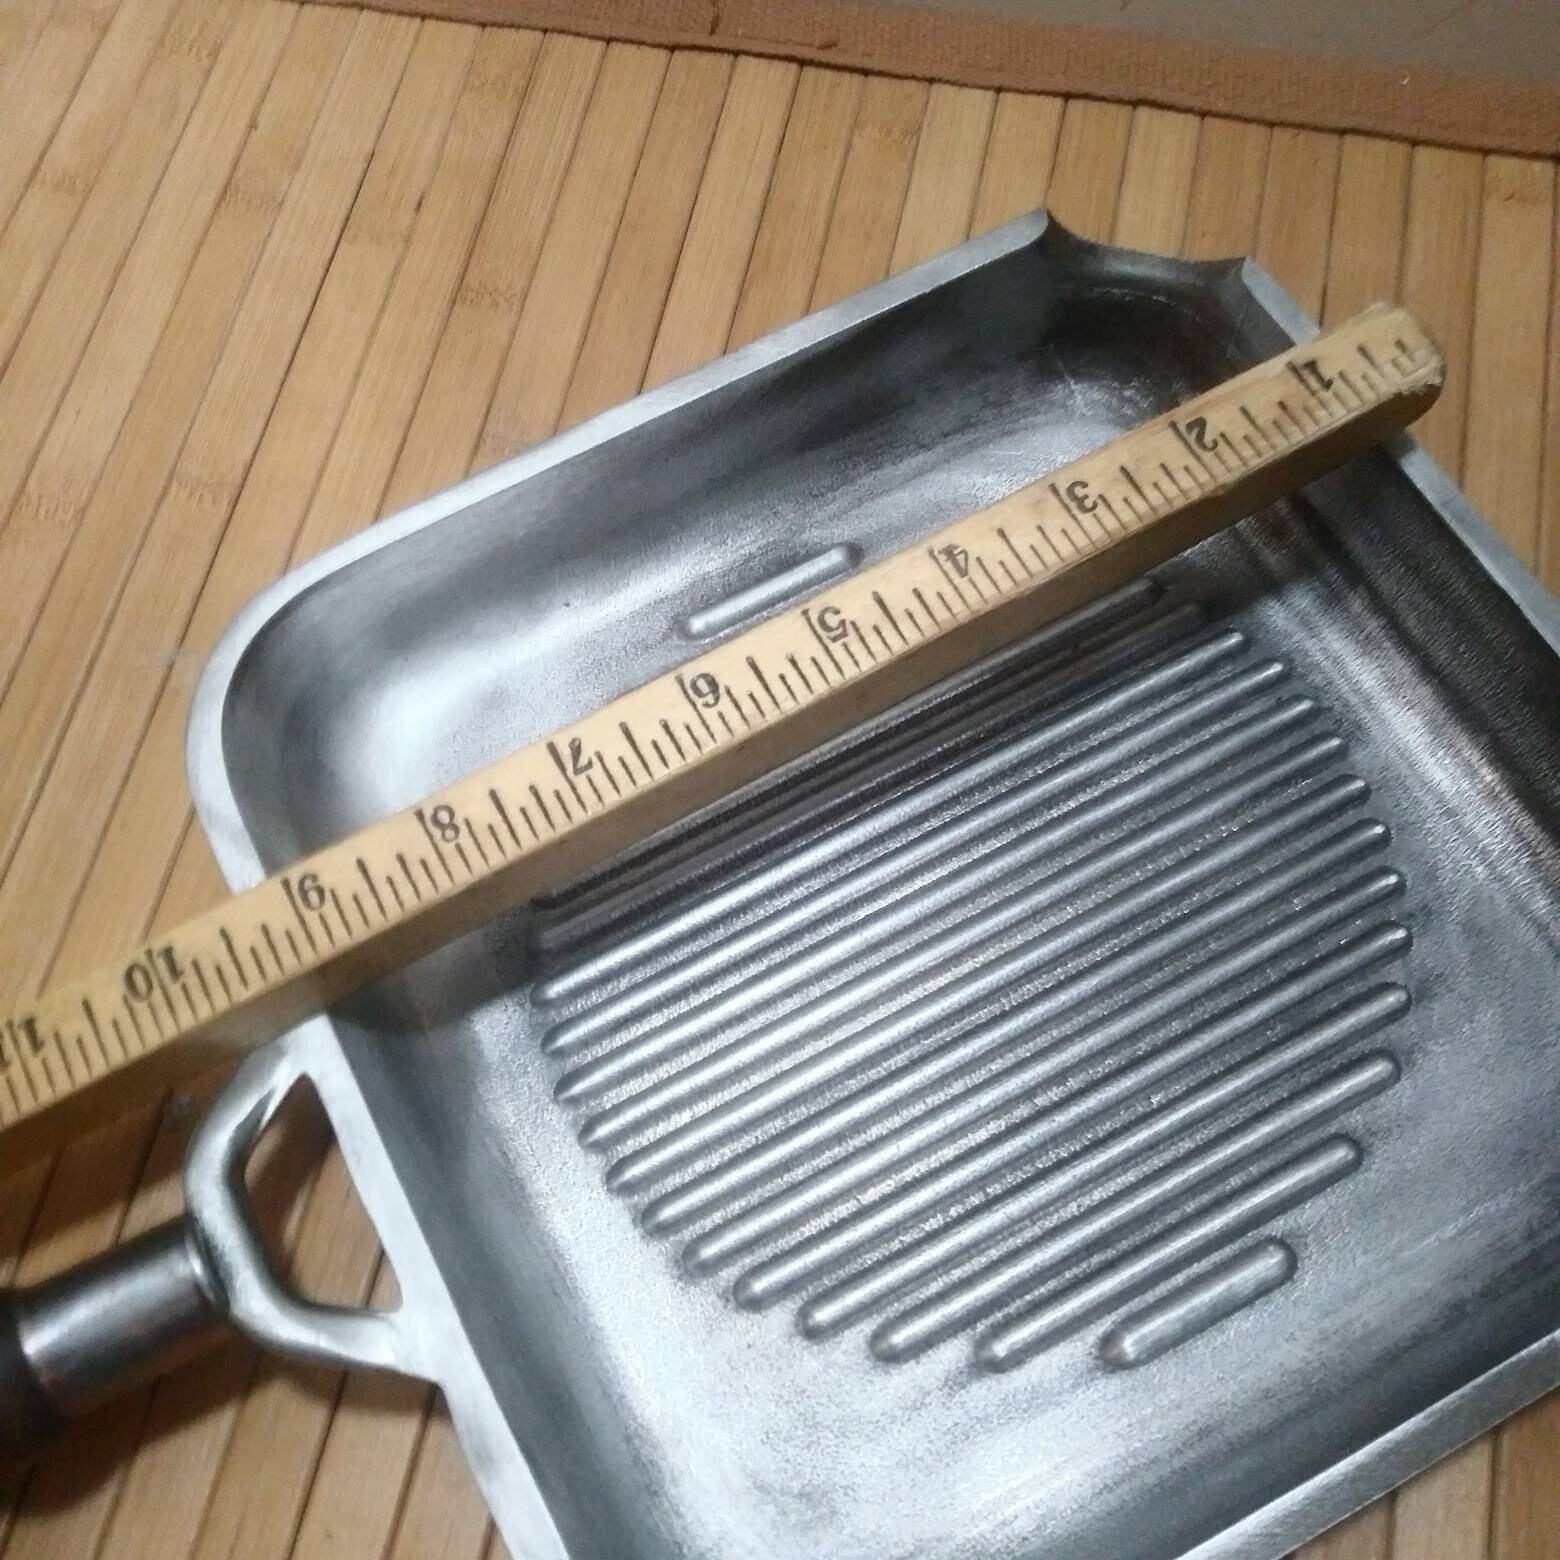 Vintage 2 Sided Square Griddle / Grill - Made In Taiwan. Aluminum